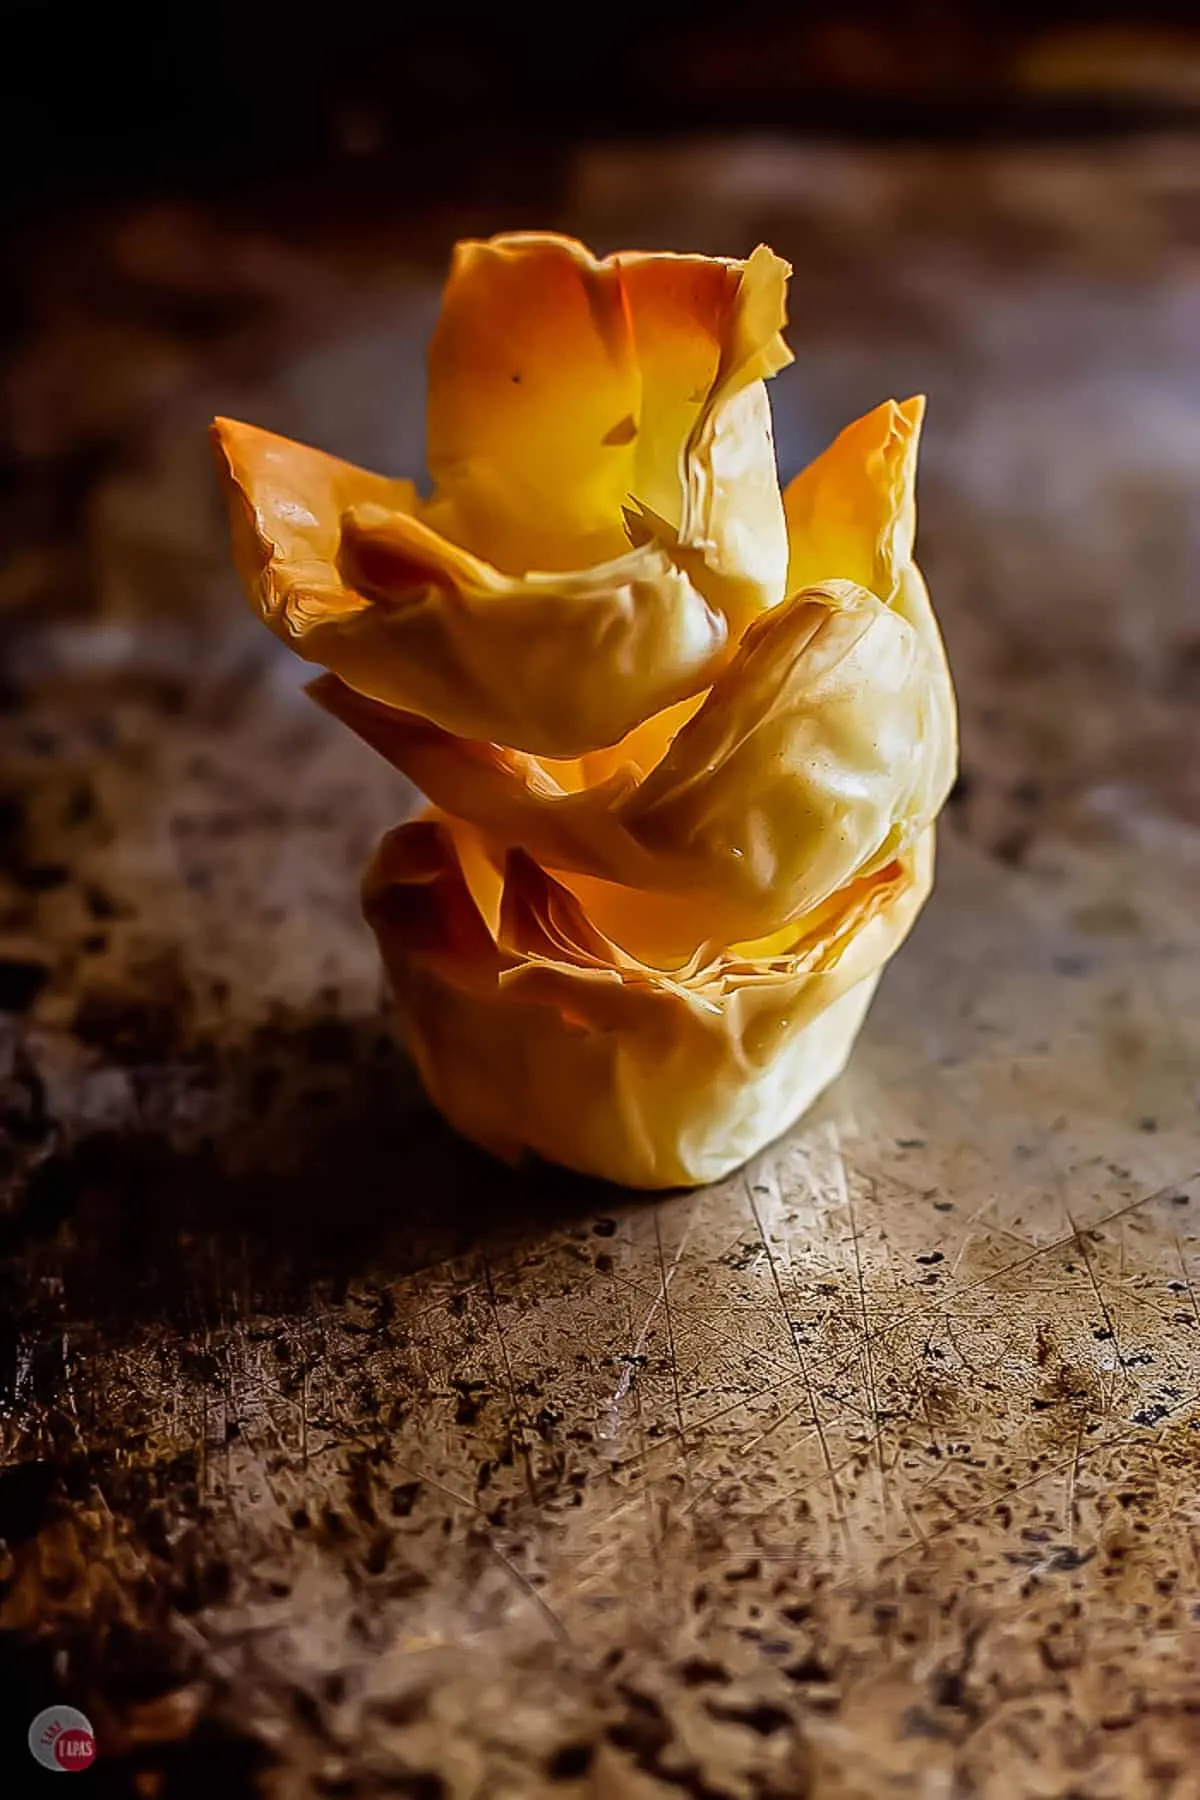 How to Make Phyllo Cups - Spend With Pennies